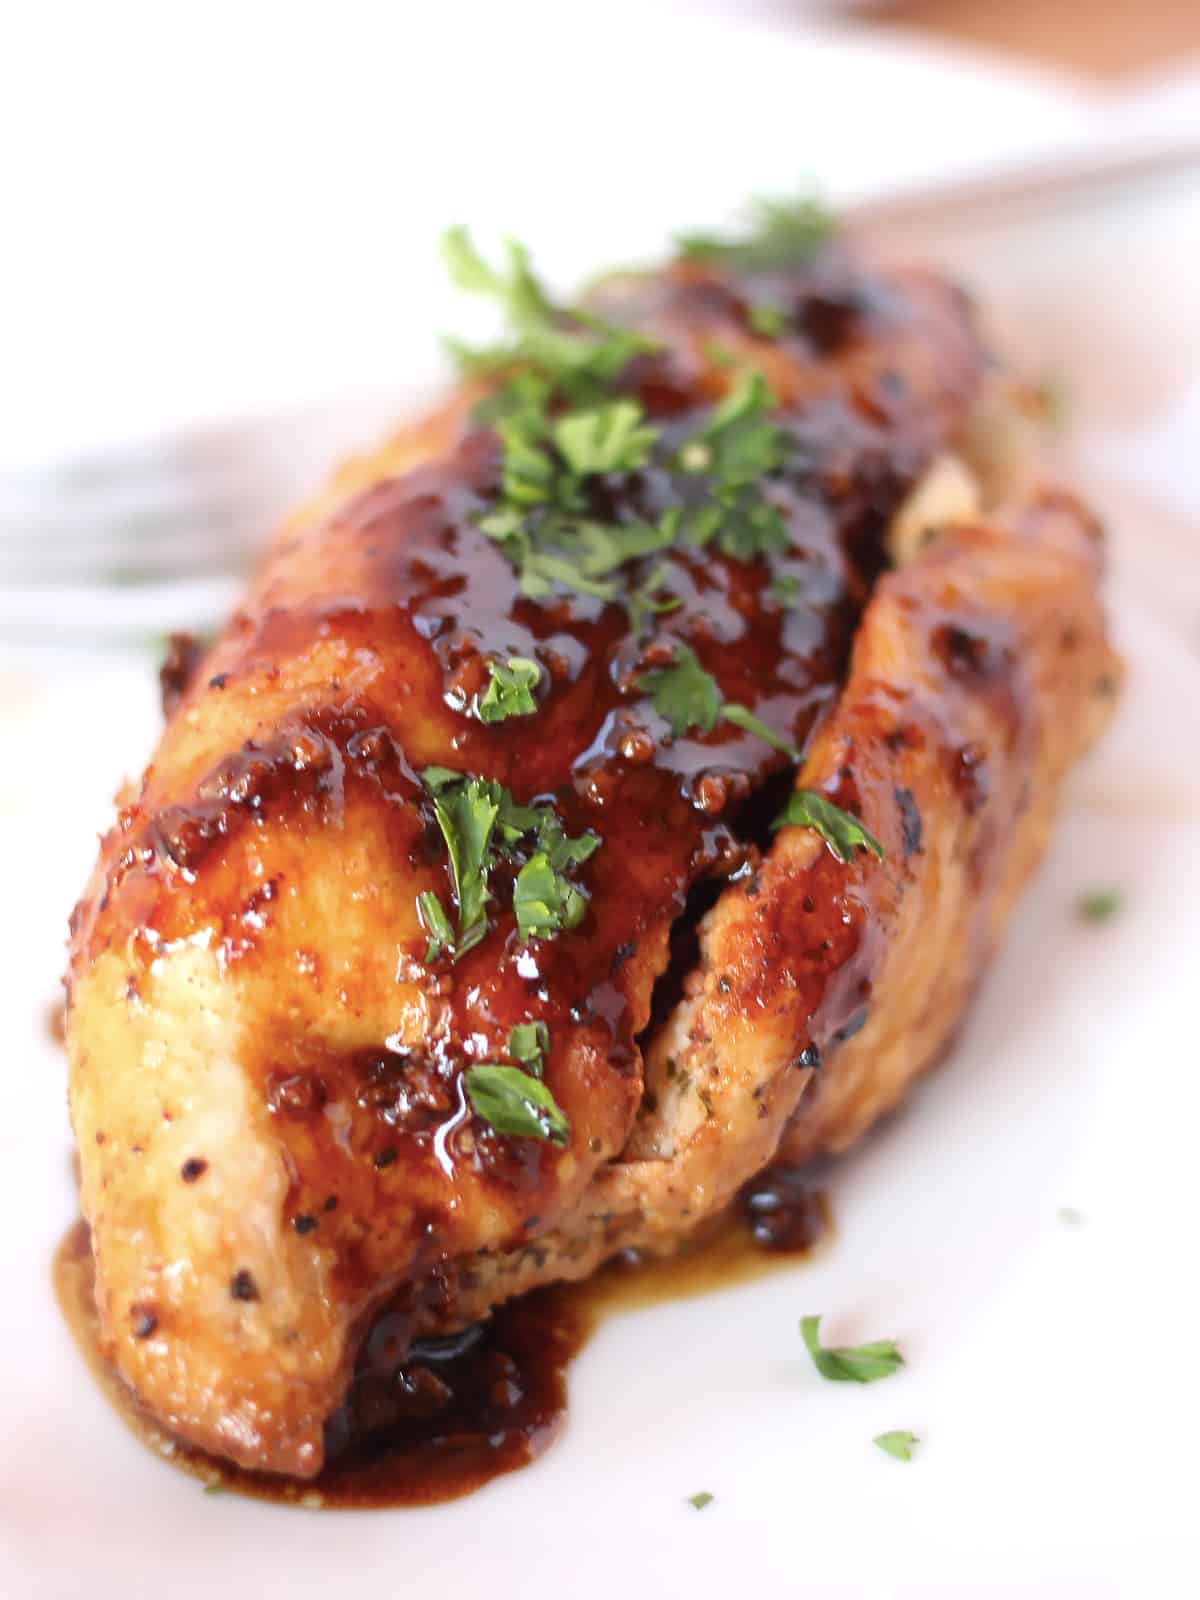 A stuffed chicken breast with balsamic reduction and fresh herb garnish.